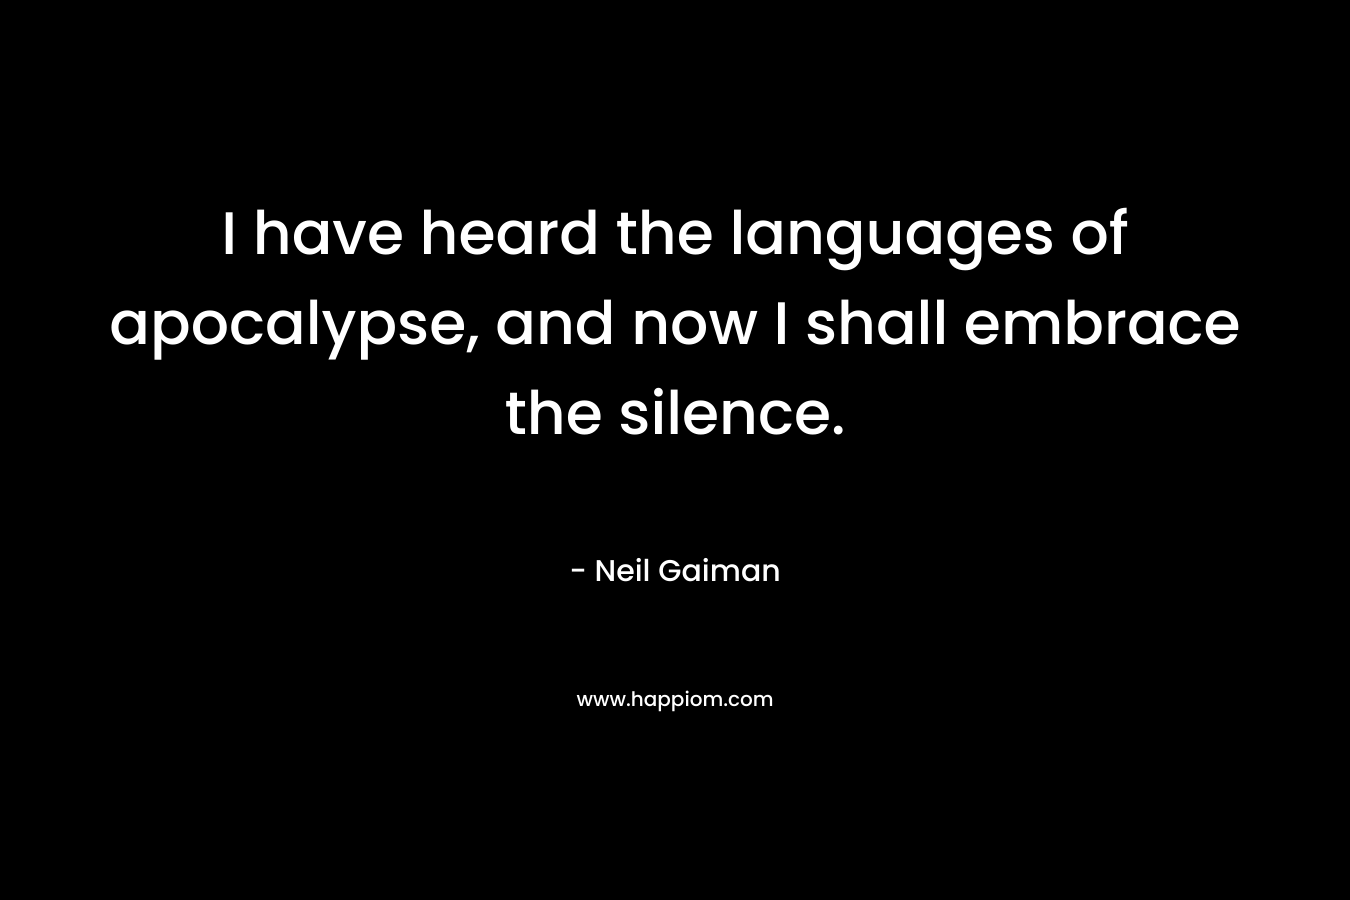 I have heard the languages of apocalypse, and now I shall embrace the silence.